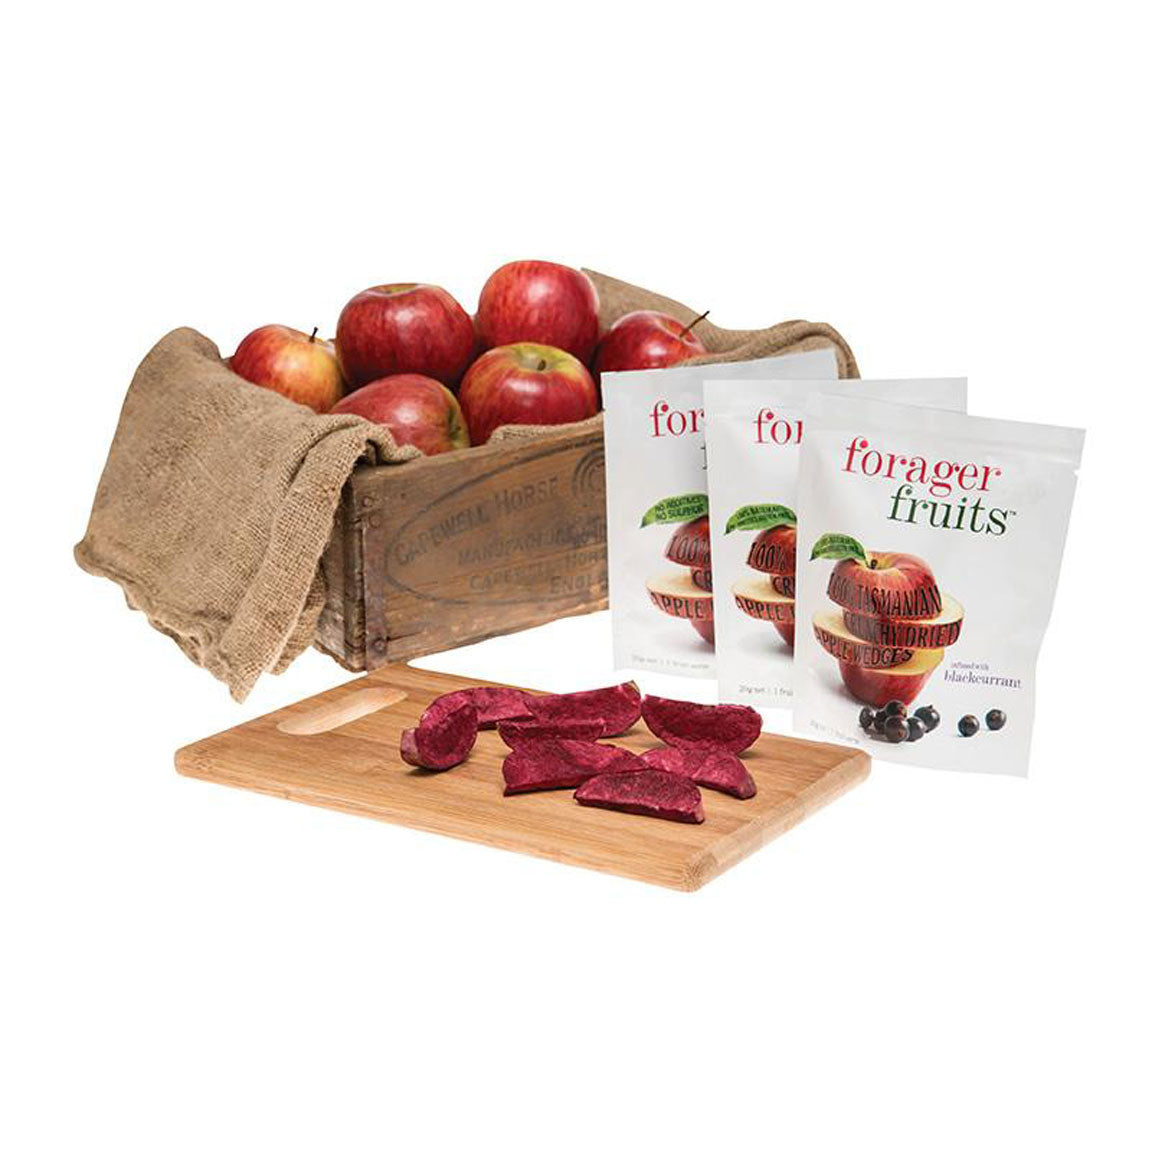 Freeze Dried Blackcurrant infused Apple Wedges